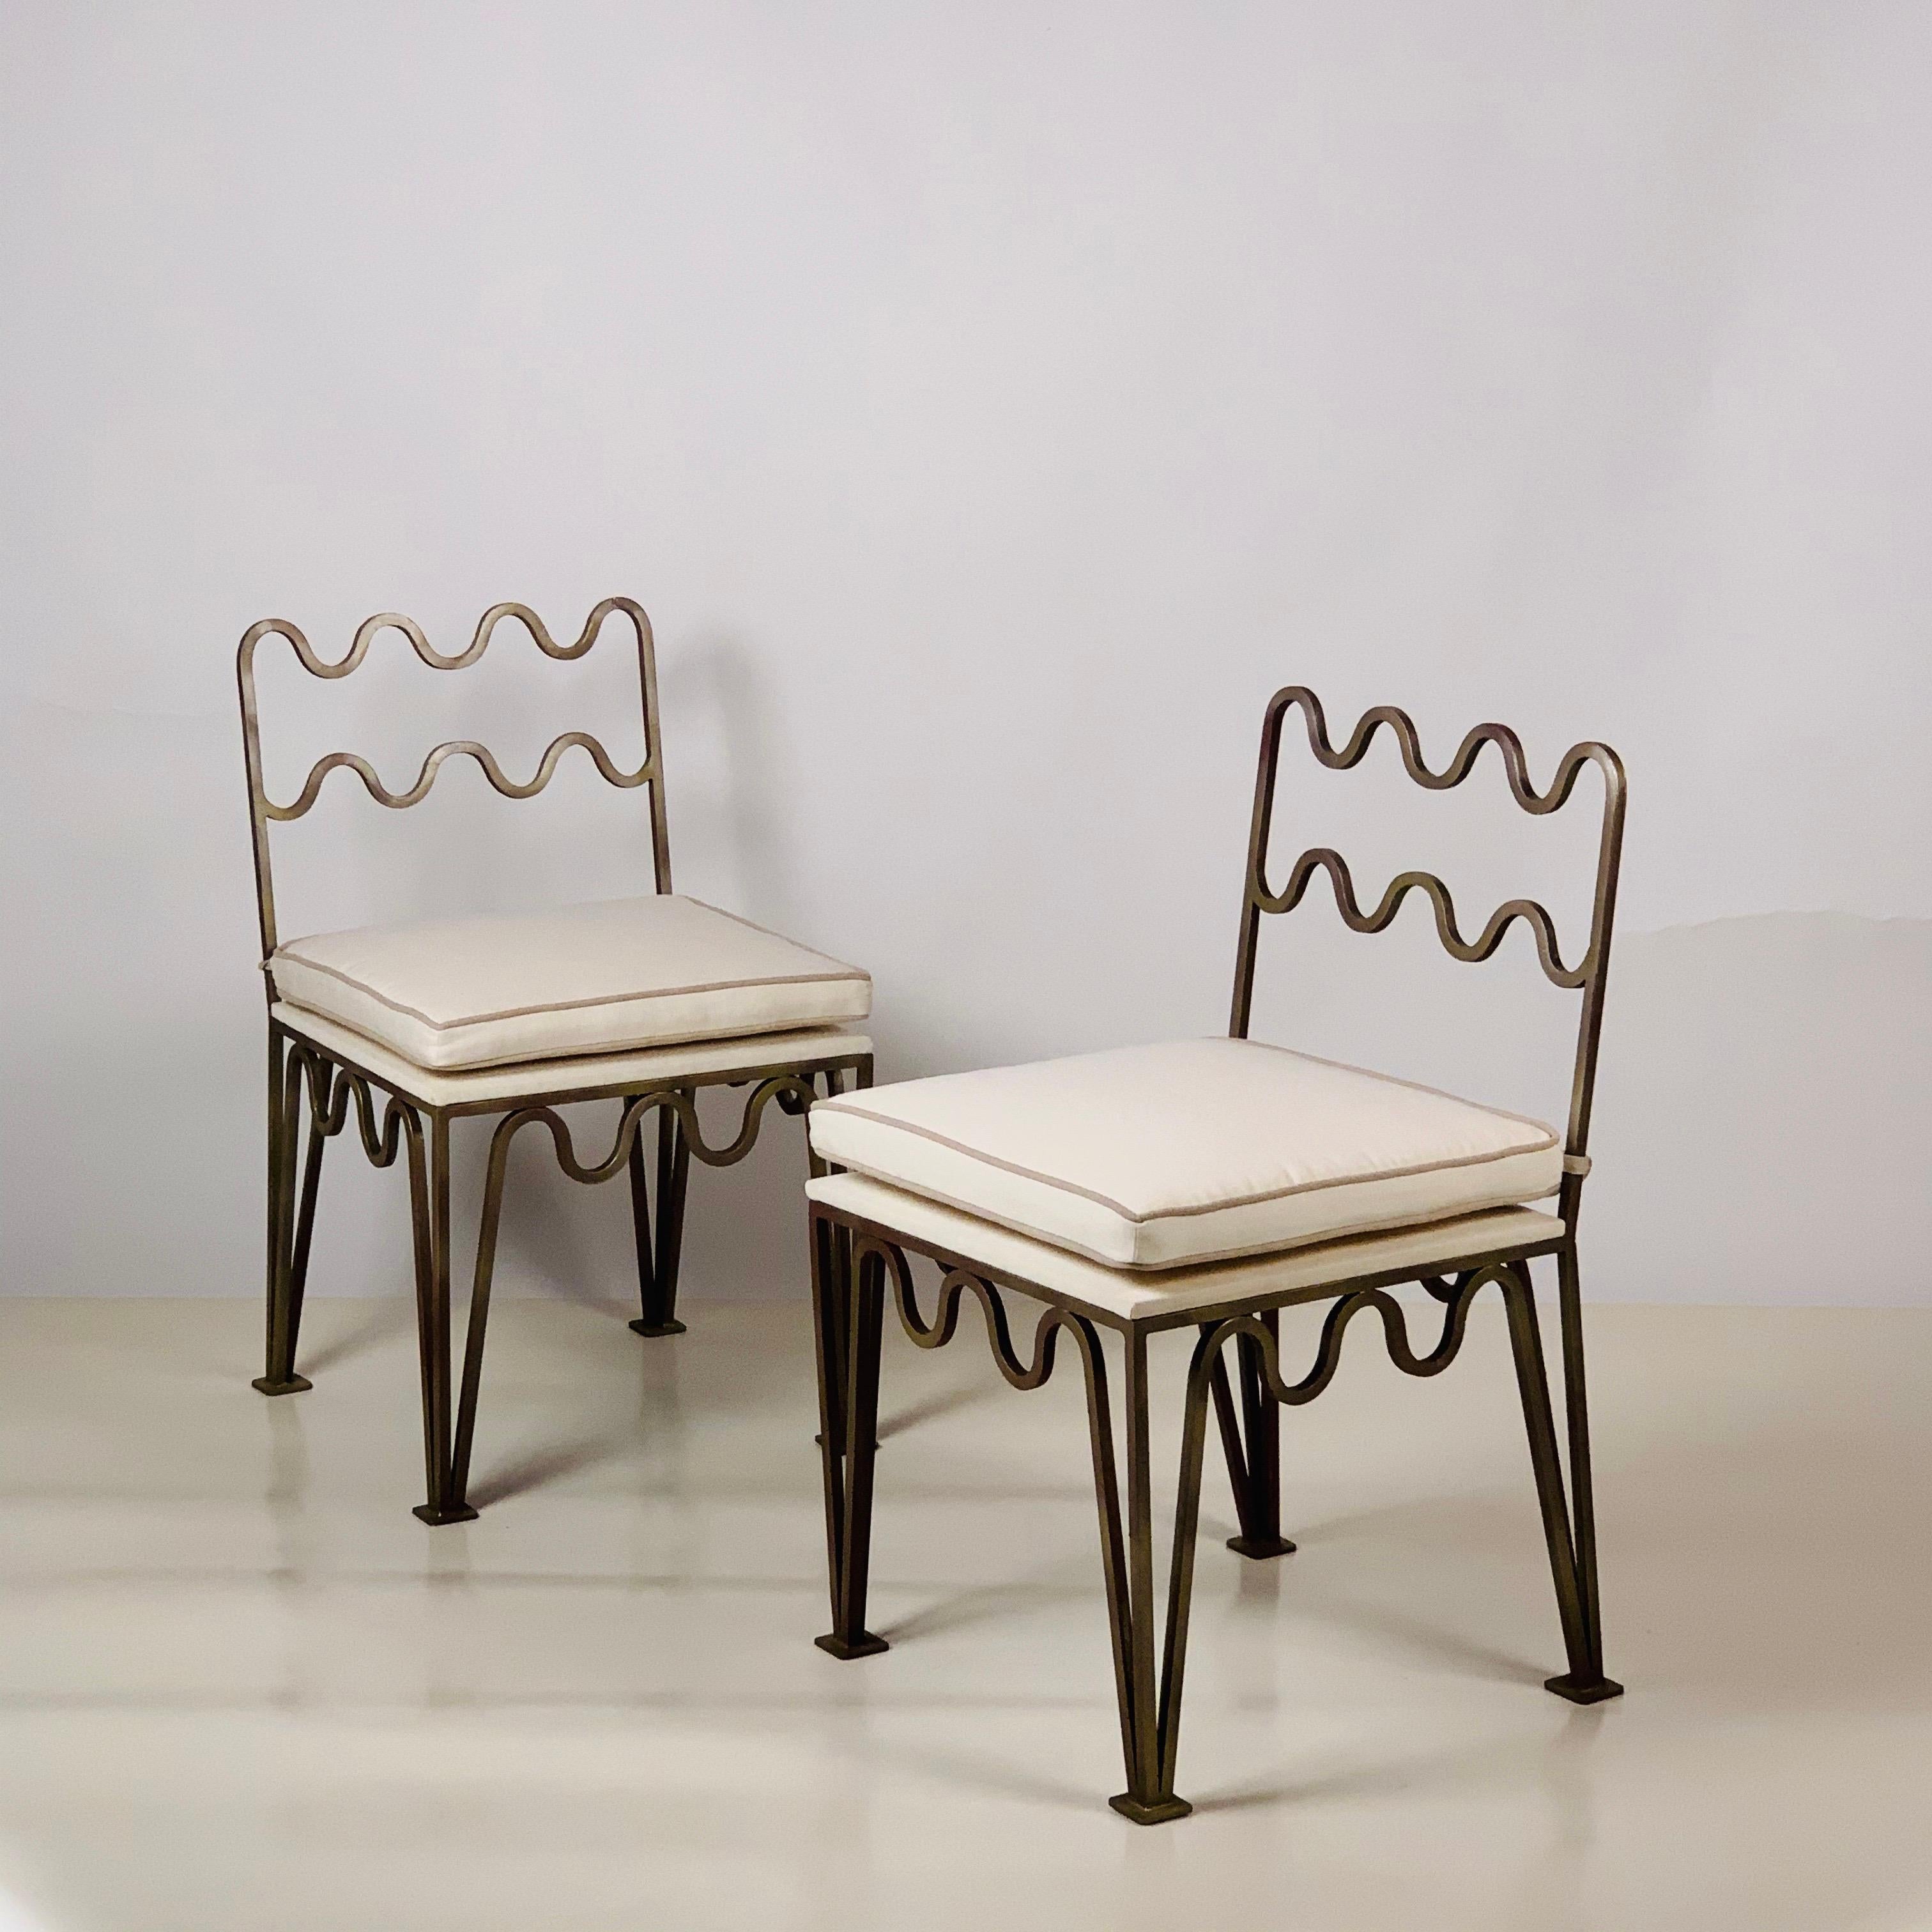 Pair of undulating 'Méandre' side chairs by DESIGN FRÈRES®.

Bronze patina over steel frames. Natural linen upholstered cushions with contrasting piping.

Chic and understated.